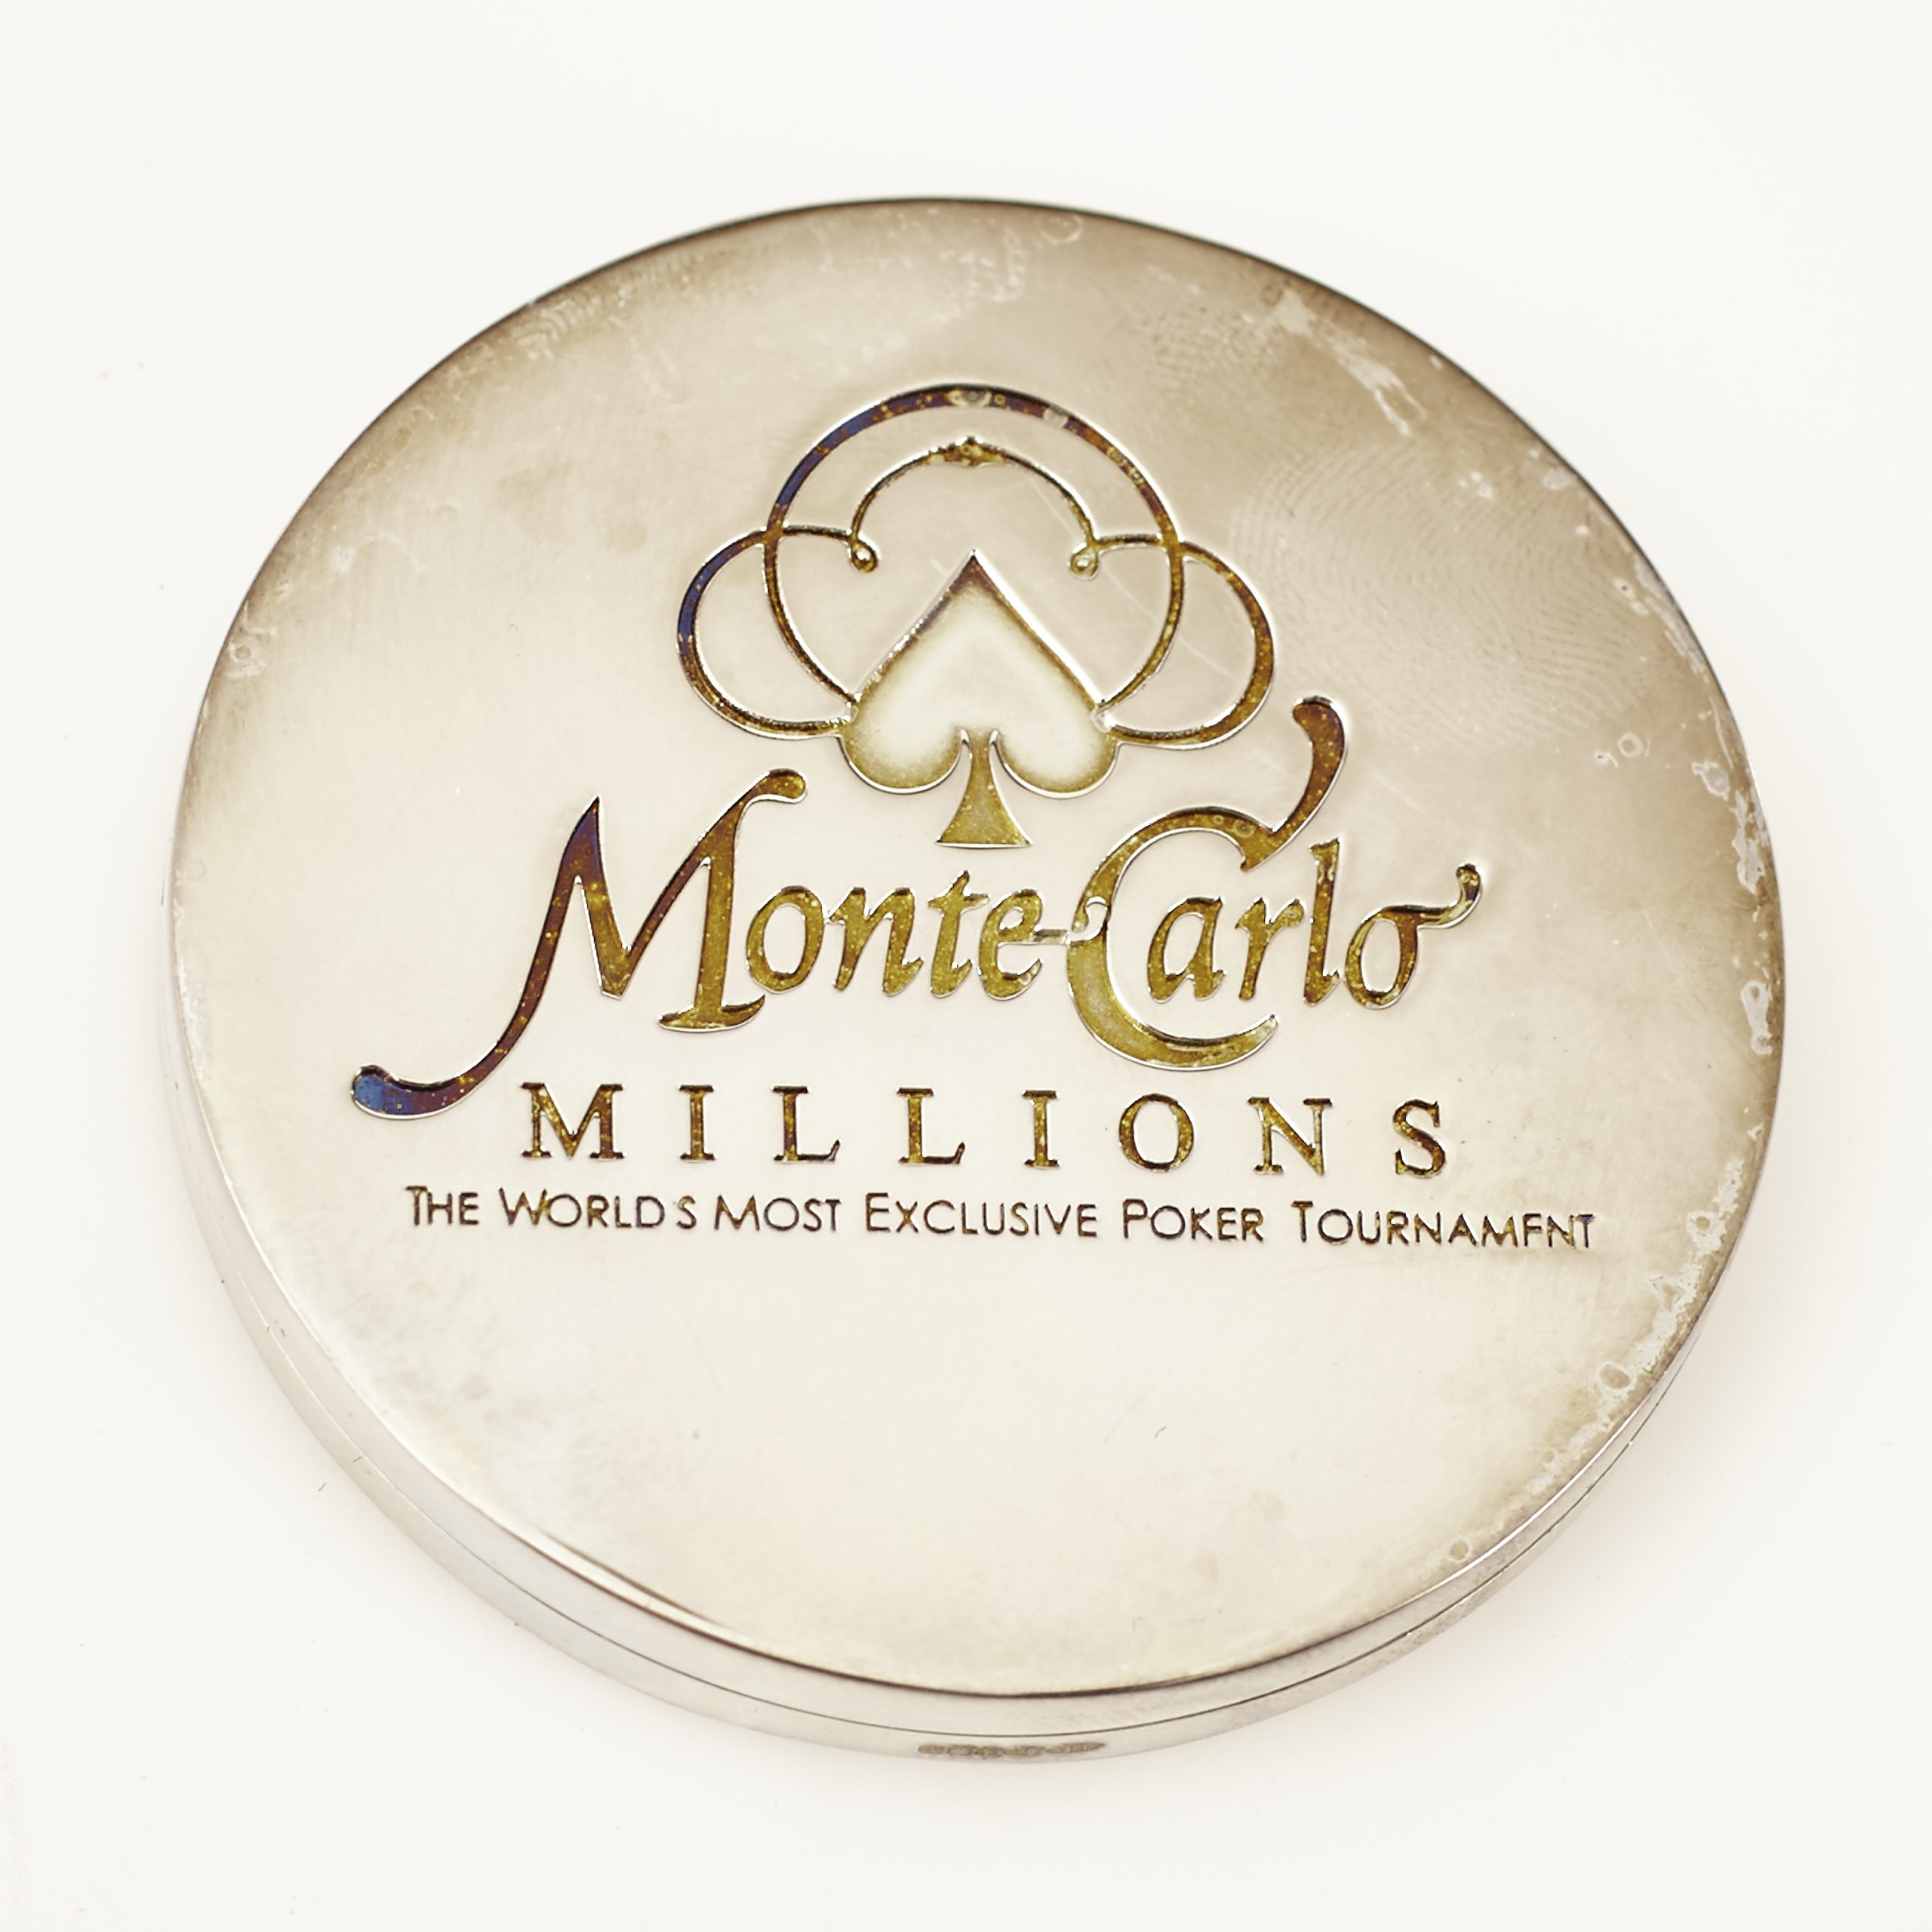 MONTE CARLO MILLIONS, (WITH SILVER ENGRAVING)  POKER DEALER BUTTON